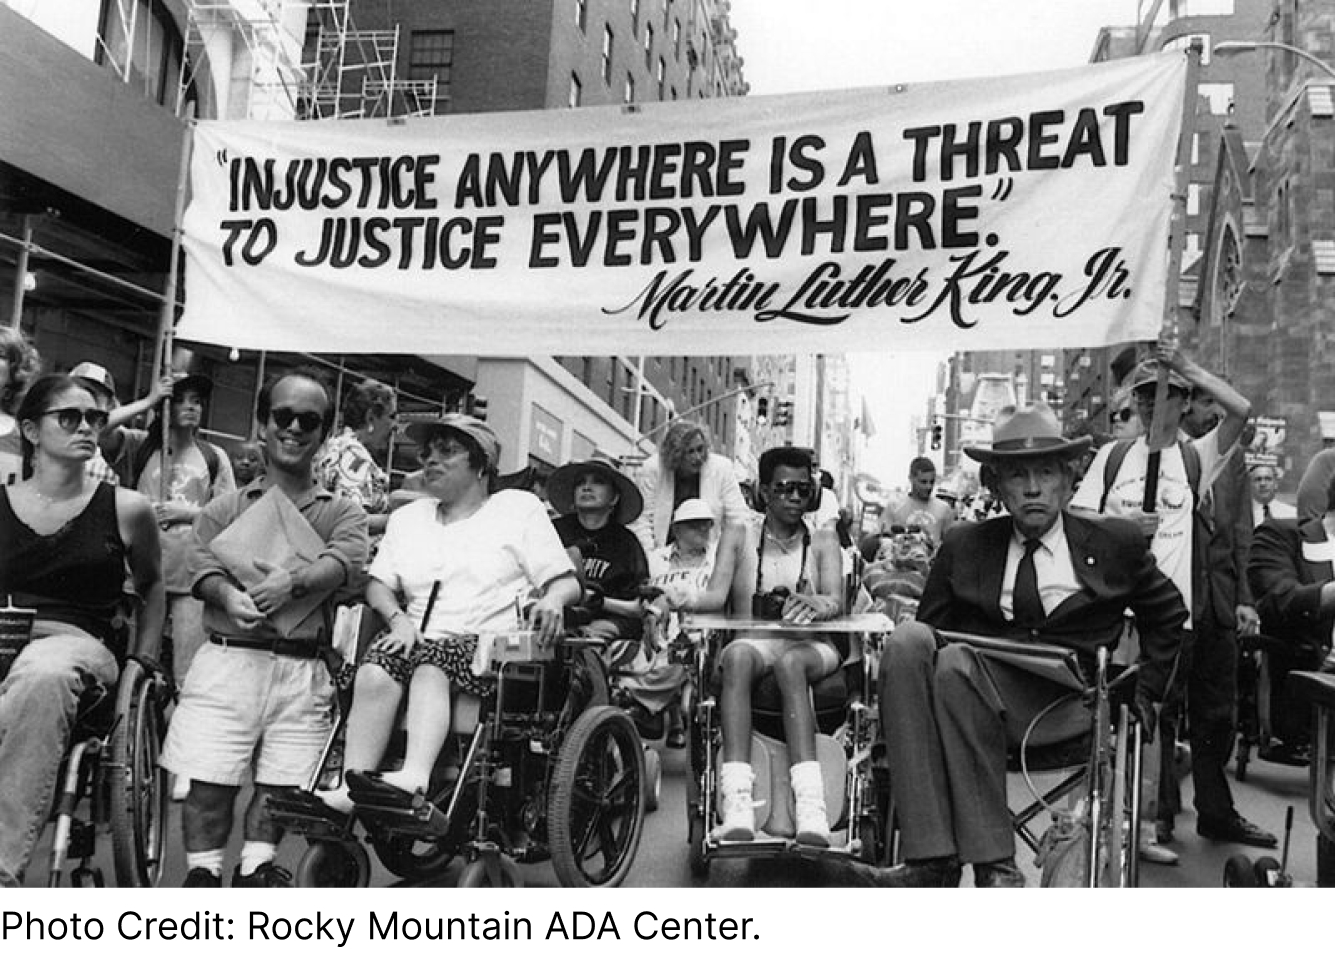 People marching in the streets holding a banner that reads 'Injustice anywhere is a threat to justice everywhere. Martin Luther King. Jr.' Photo credit in the image saying: 'Photo credit: Rocky Mountain ADA Center'